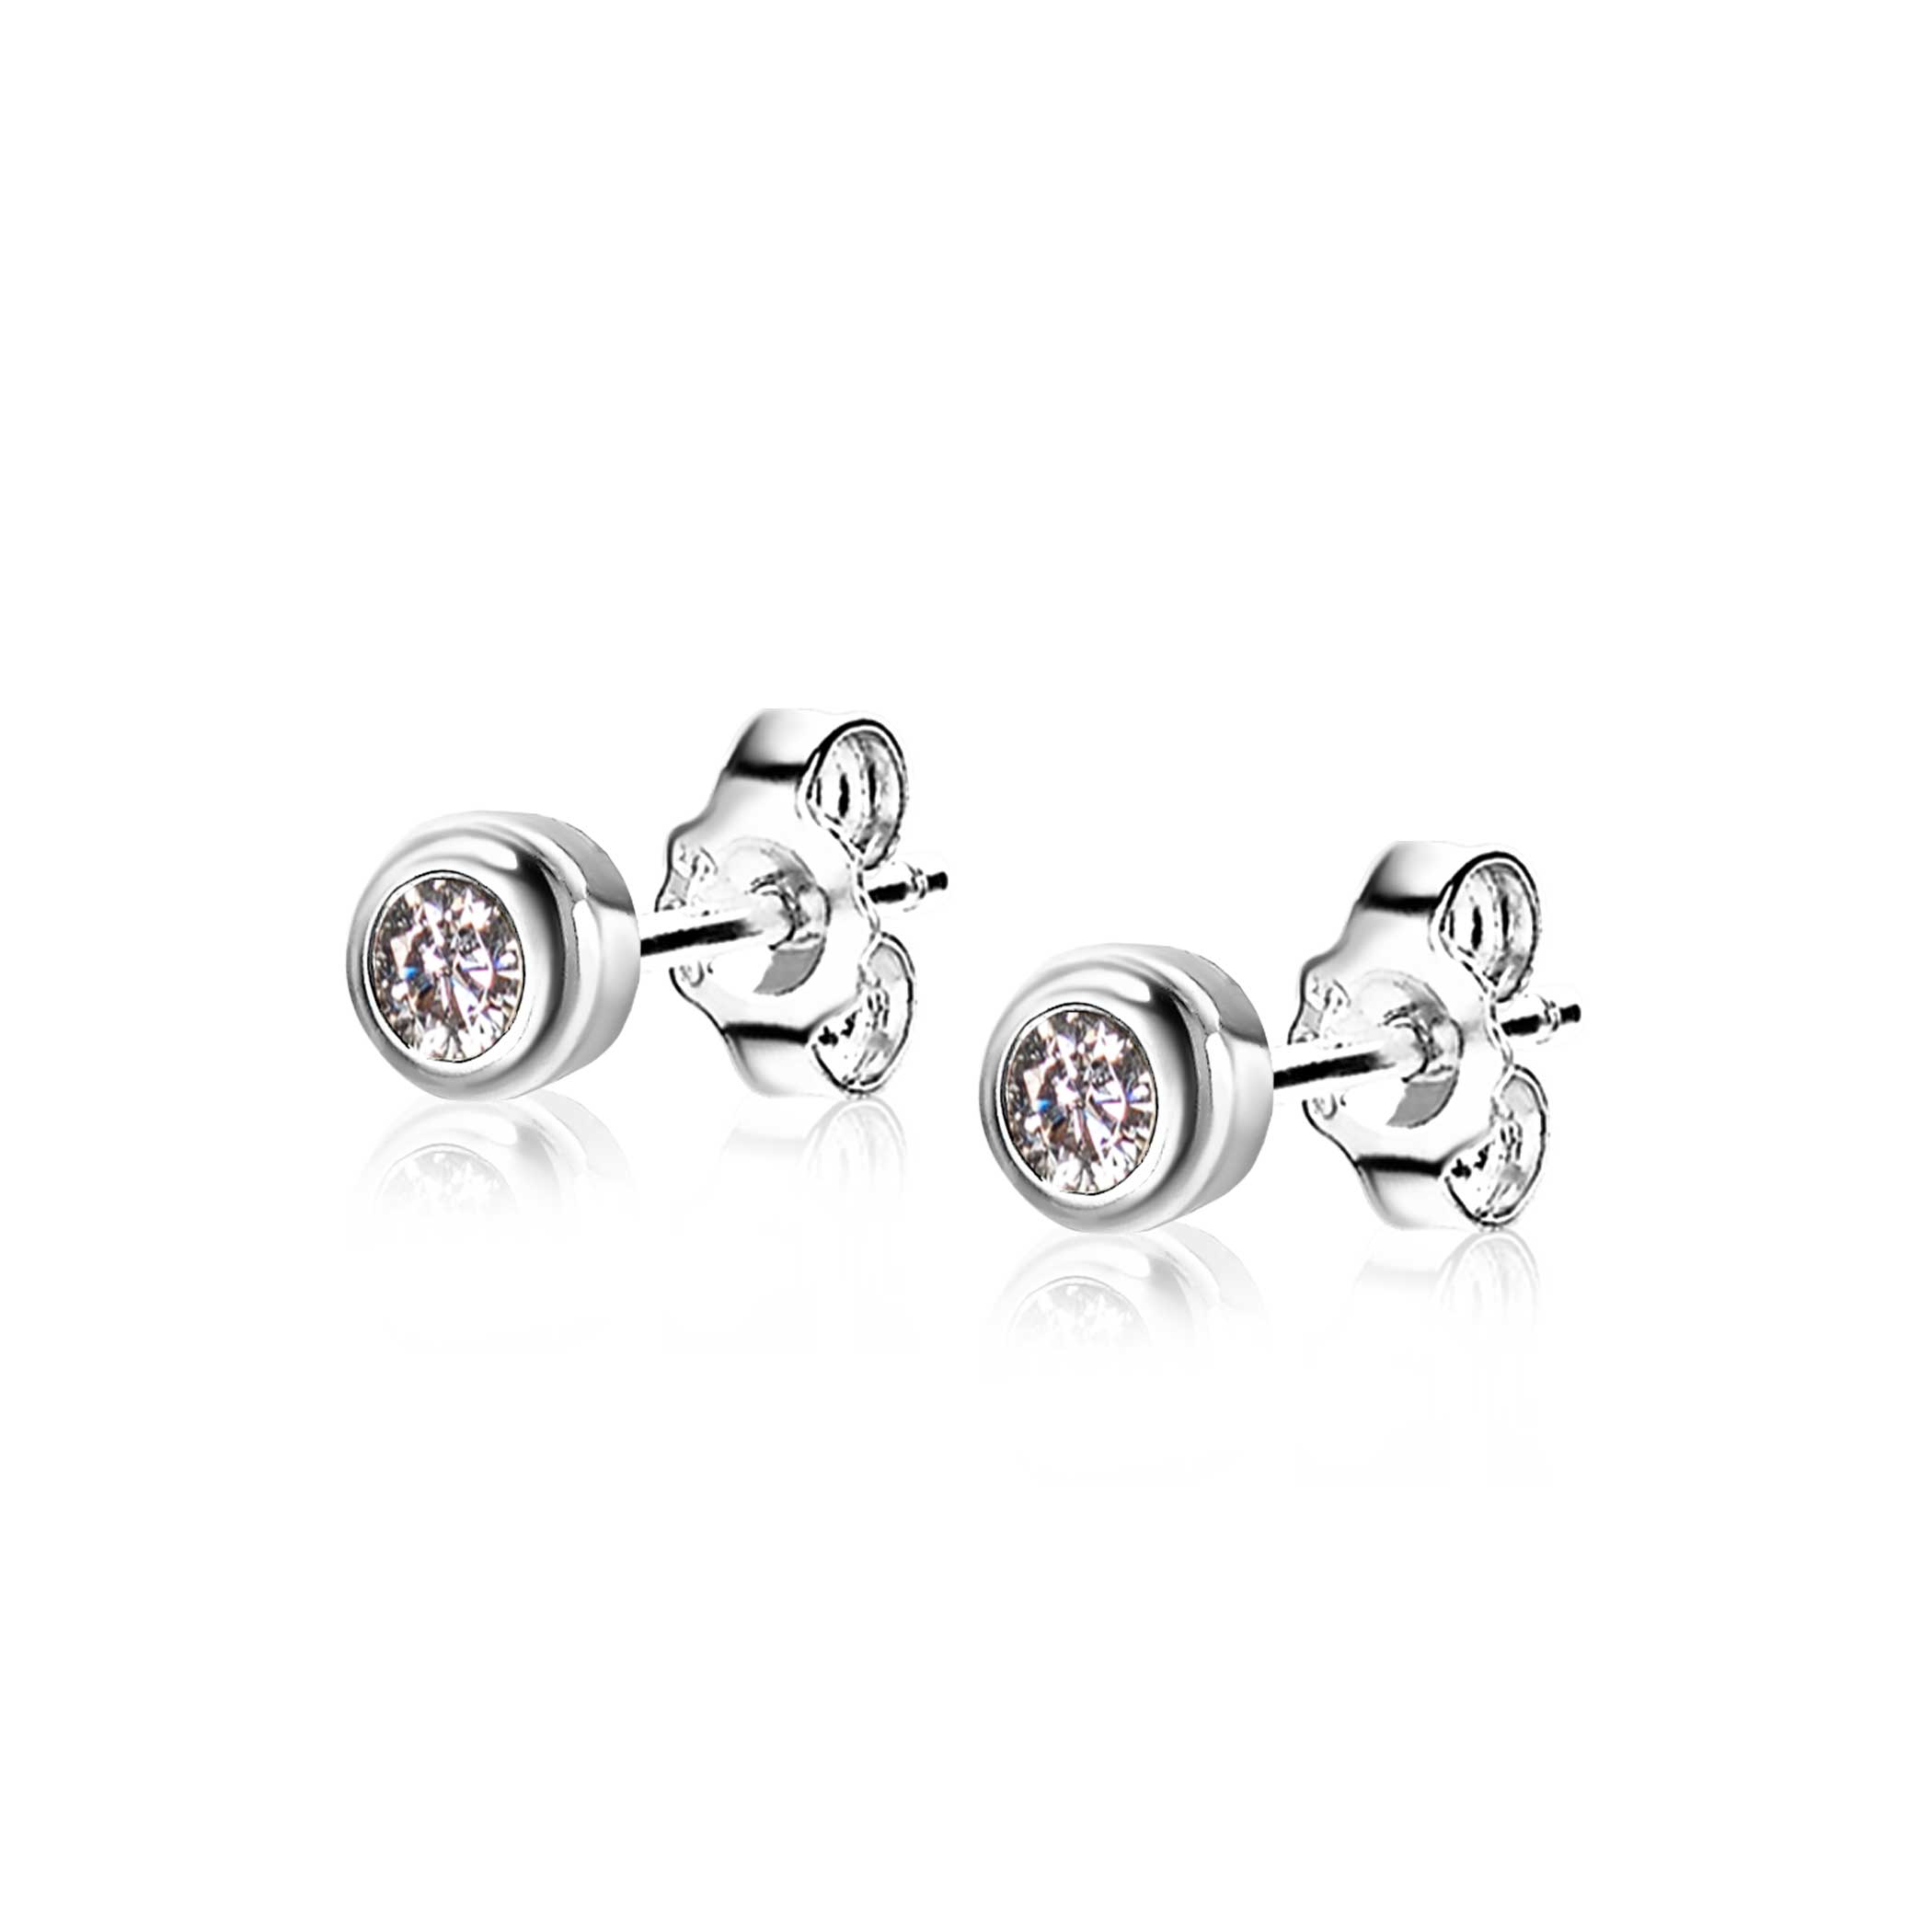 APRIL Stud Earrings 4mm Sterling Silver with Birthstone Diamond White Zirconia